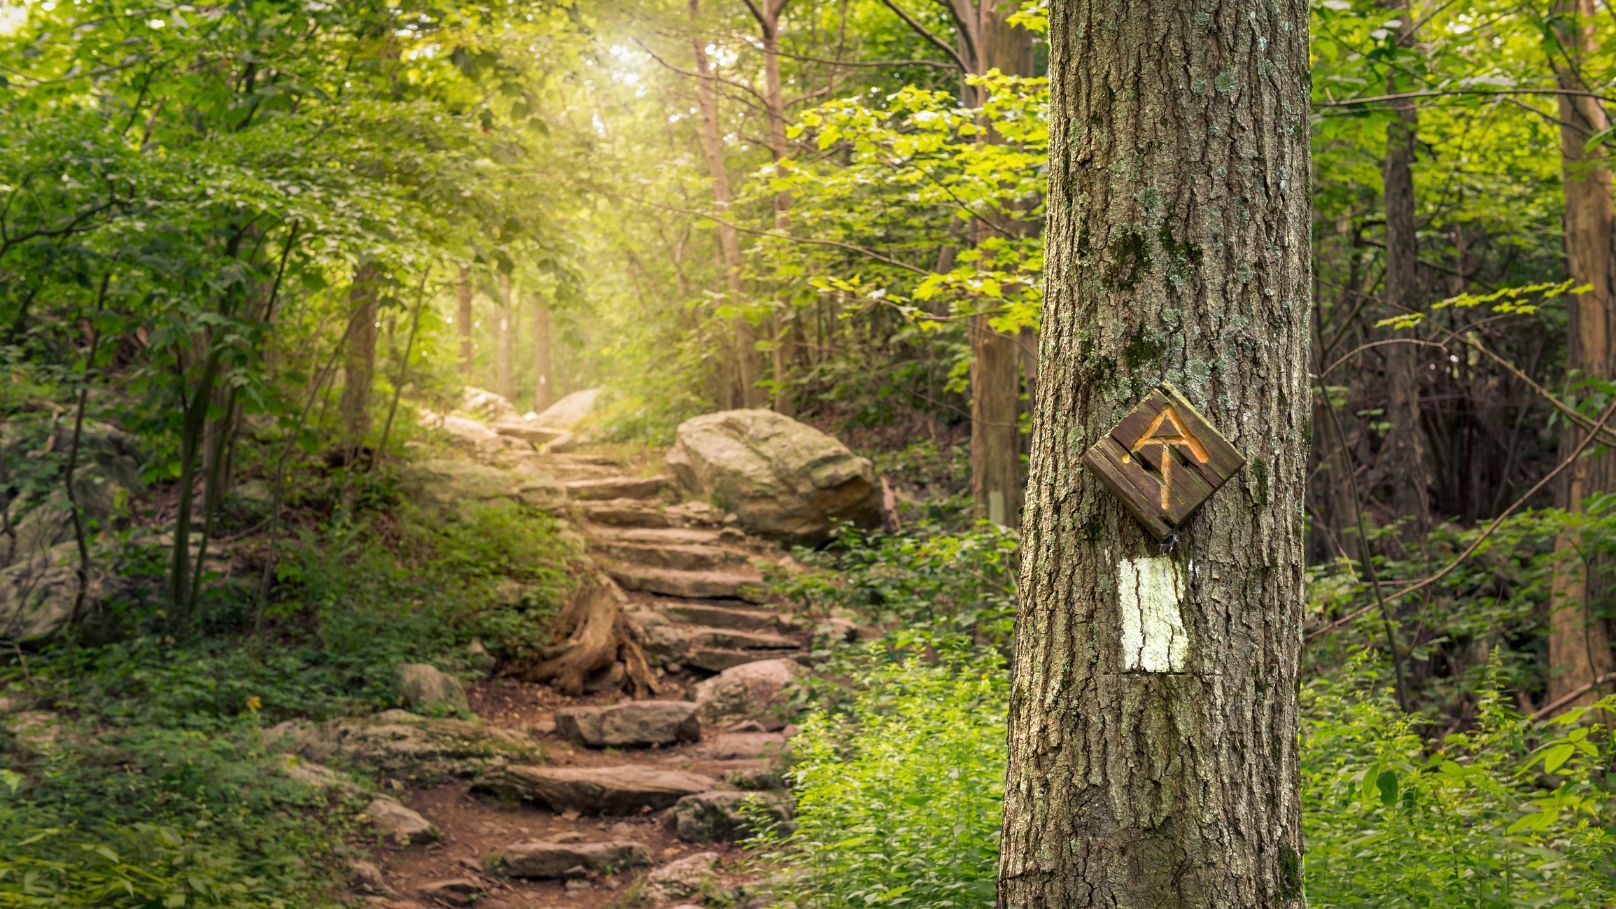 The notable markers of the Appalachian Trail will guide you the entire way up the route. Photo: Getty